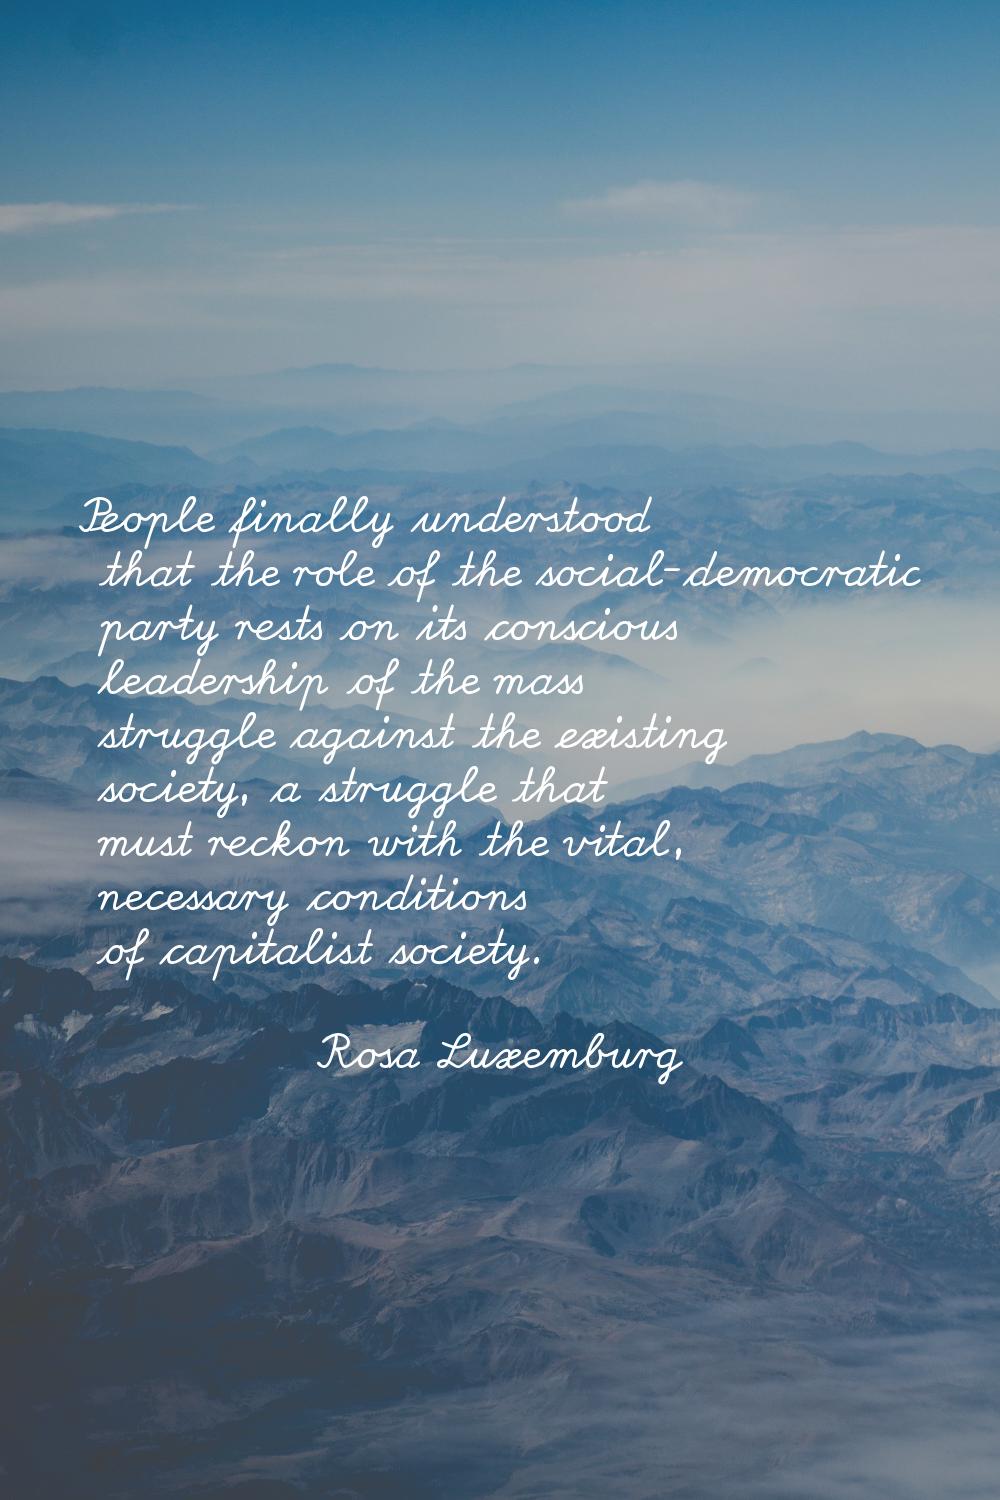 People finally understood that the role of the social-democratic party rests on its conscious leade